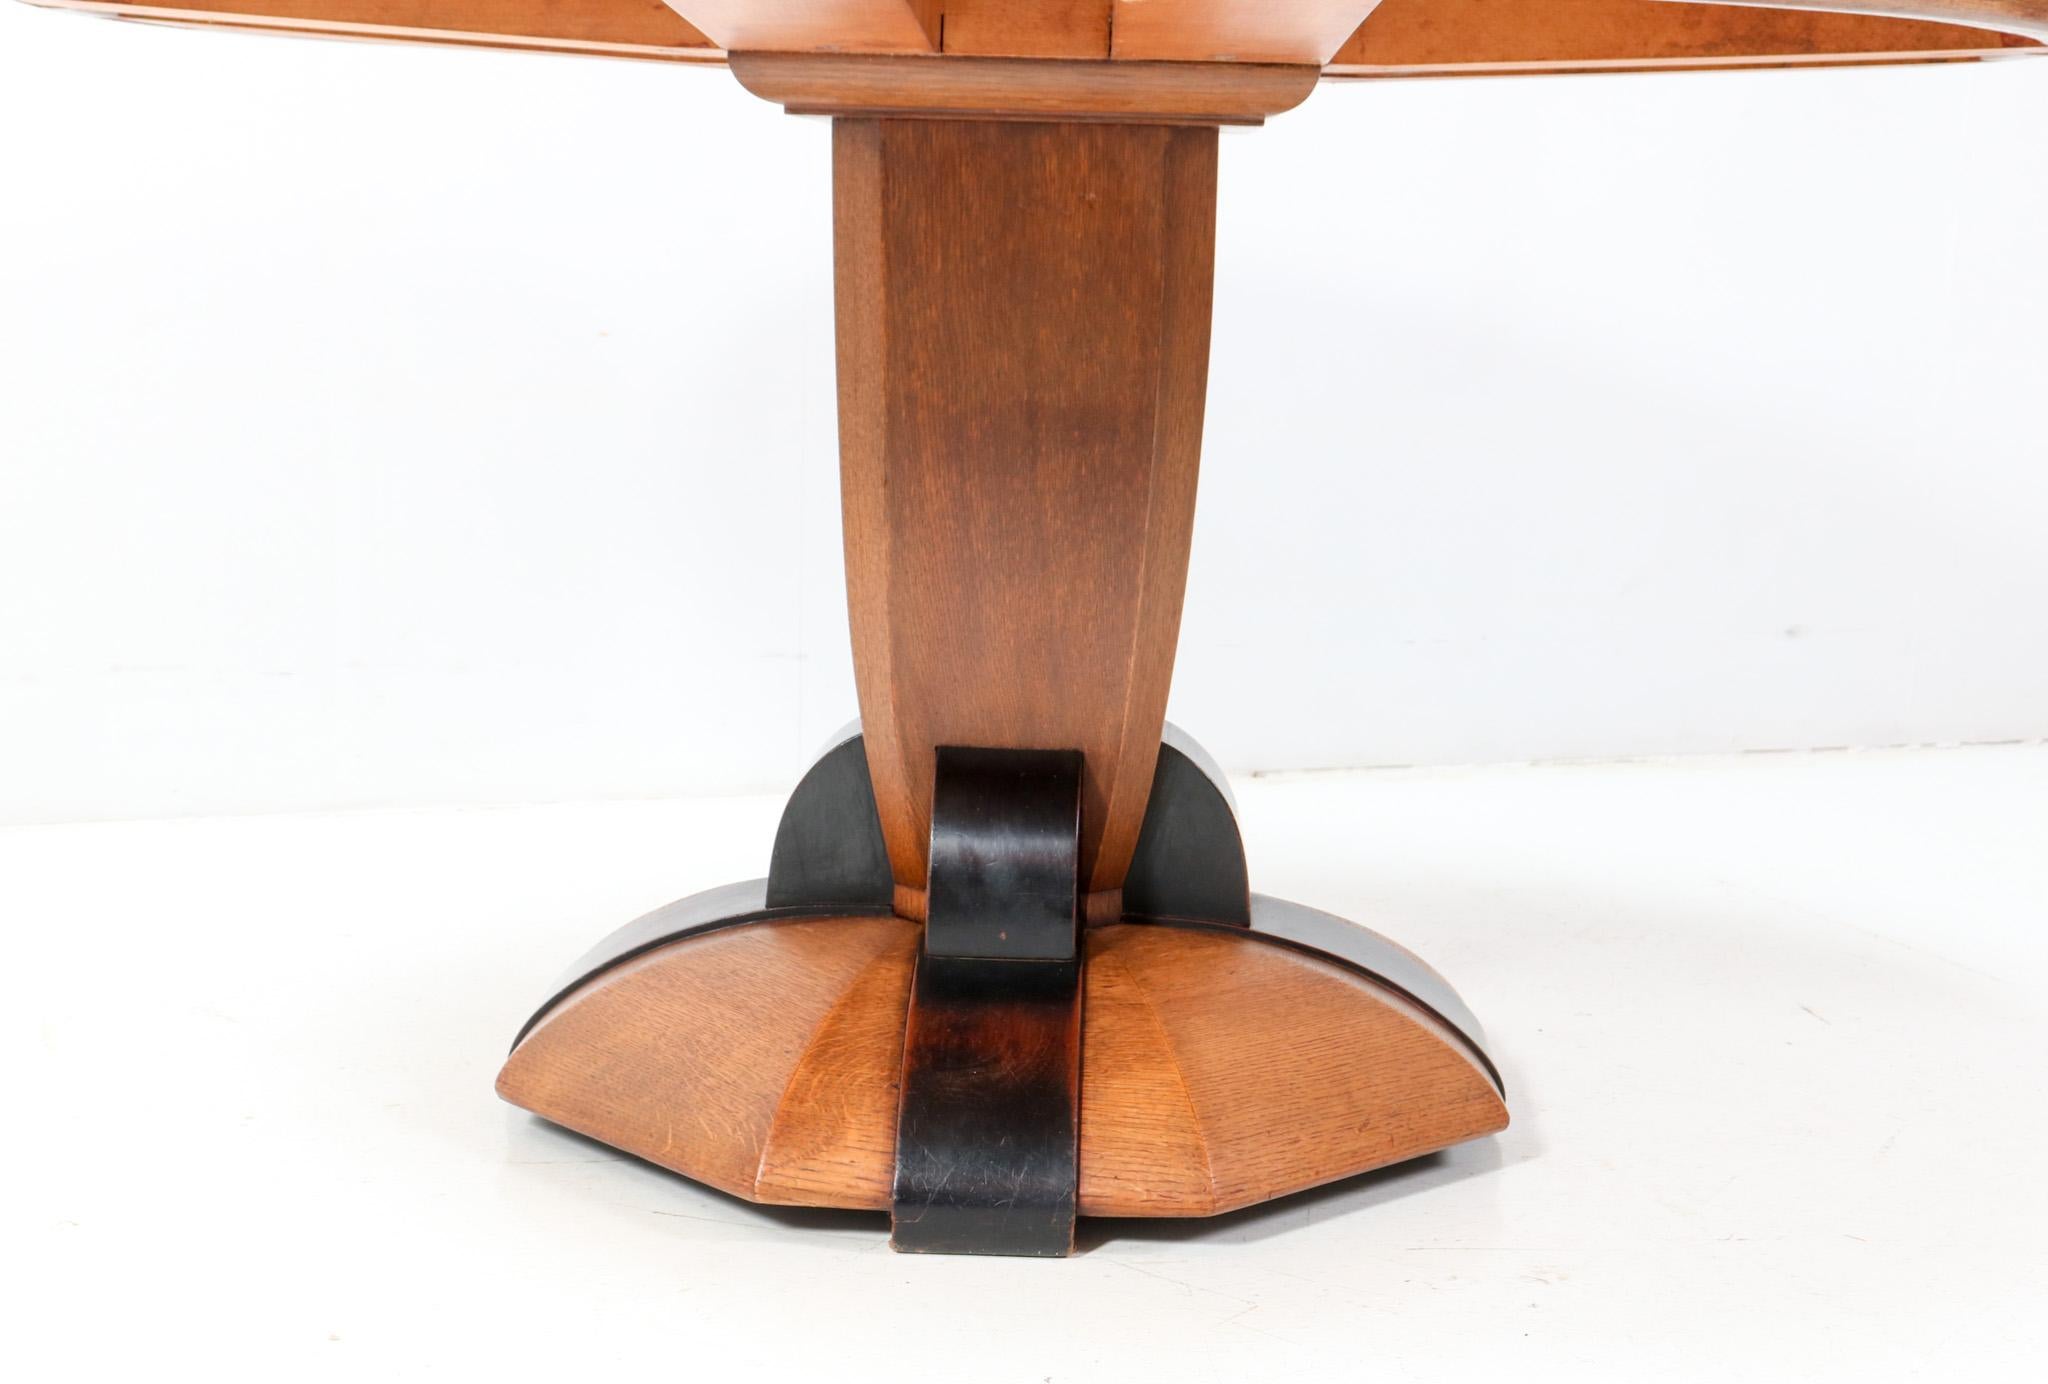  Art Deco Amsterdamse School Oak Dining Room Table by Paul Bromberg for Pander For Sale 6